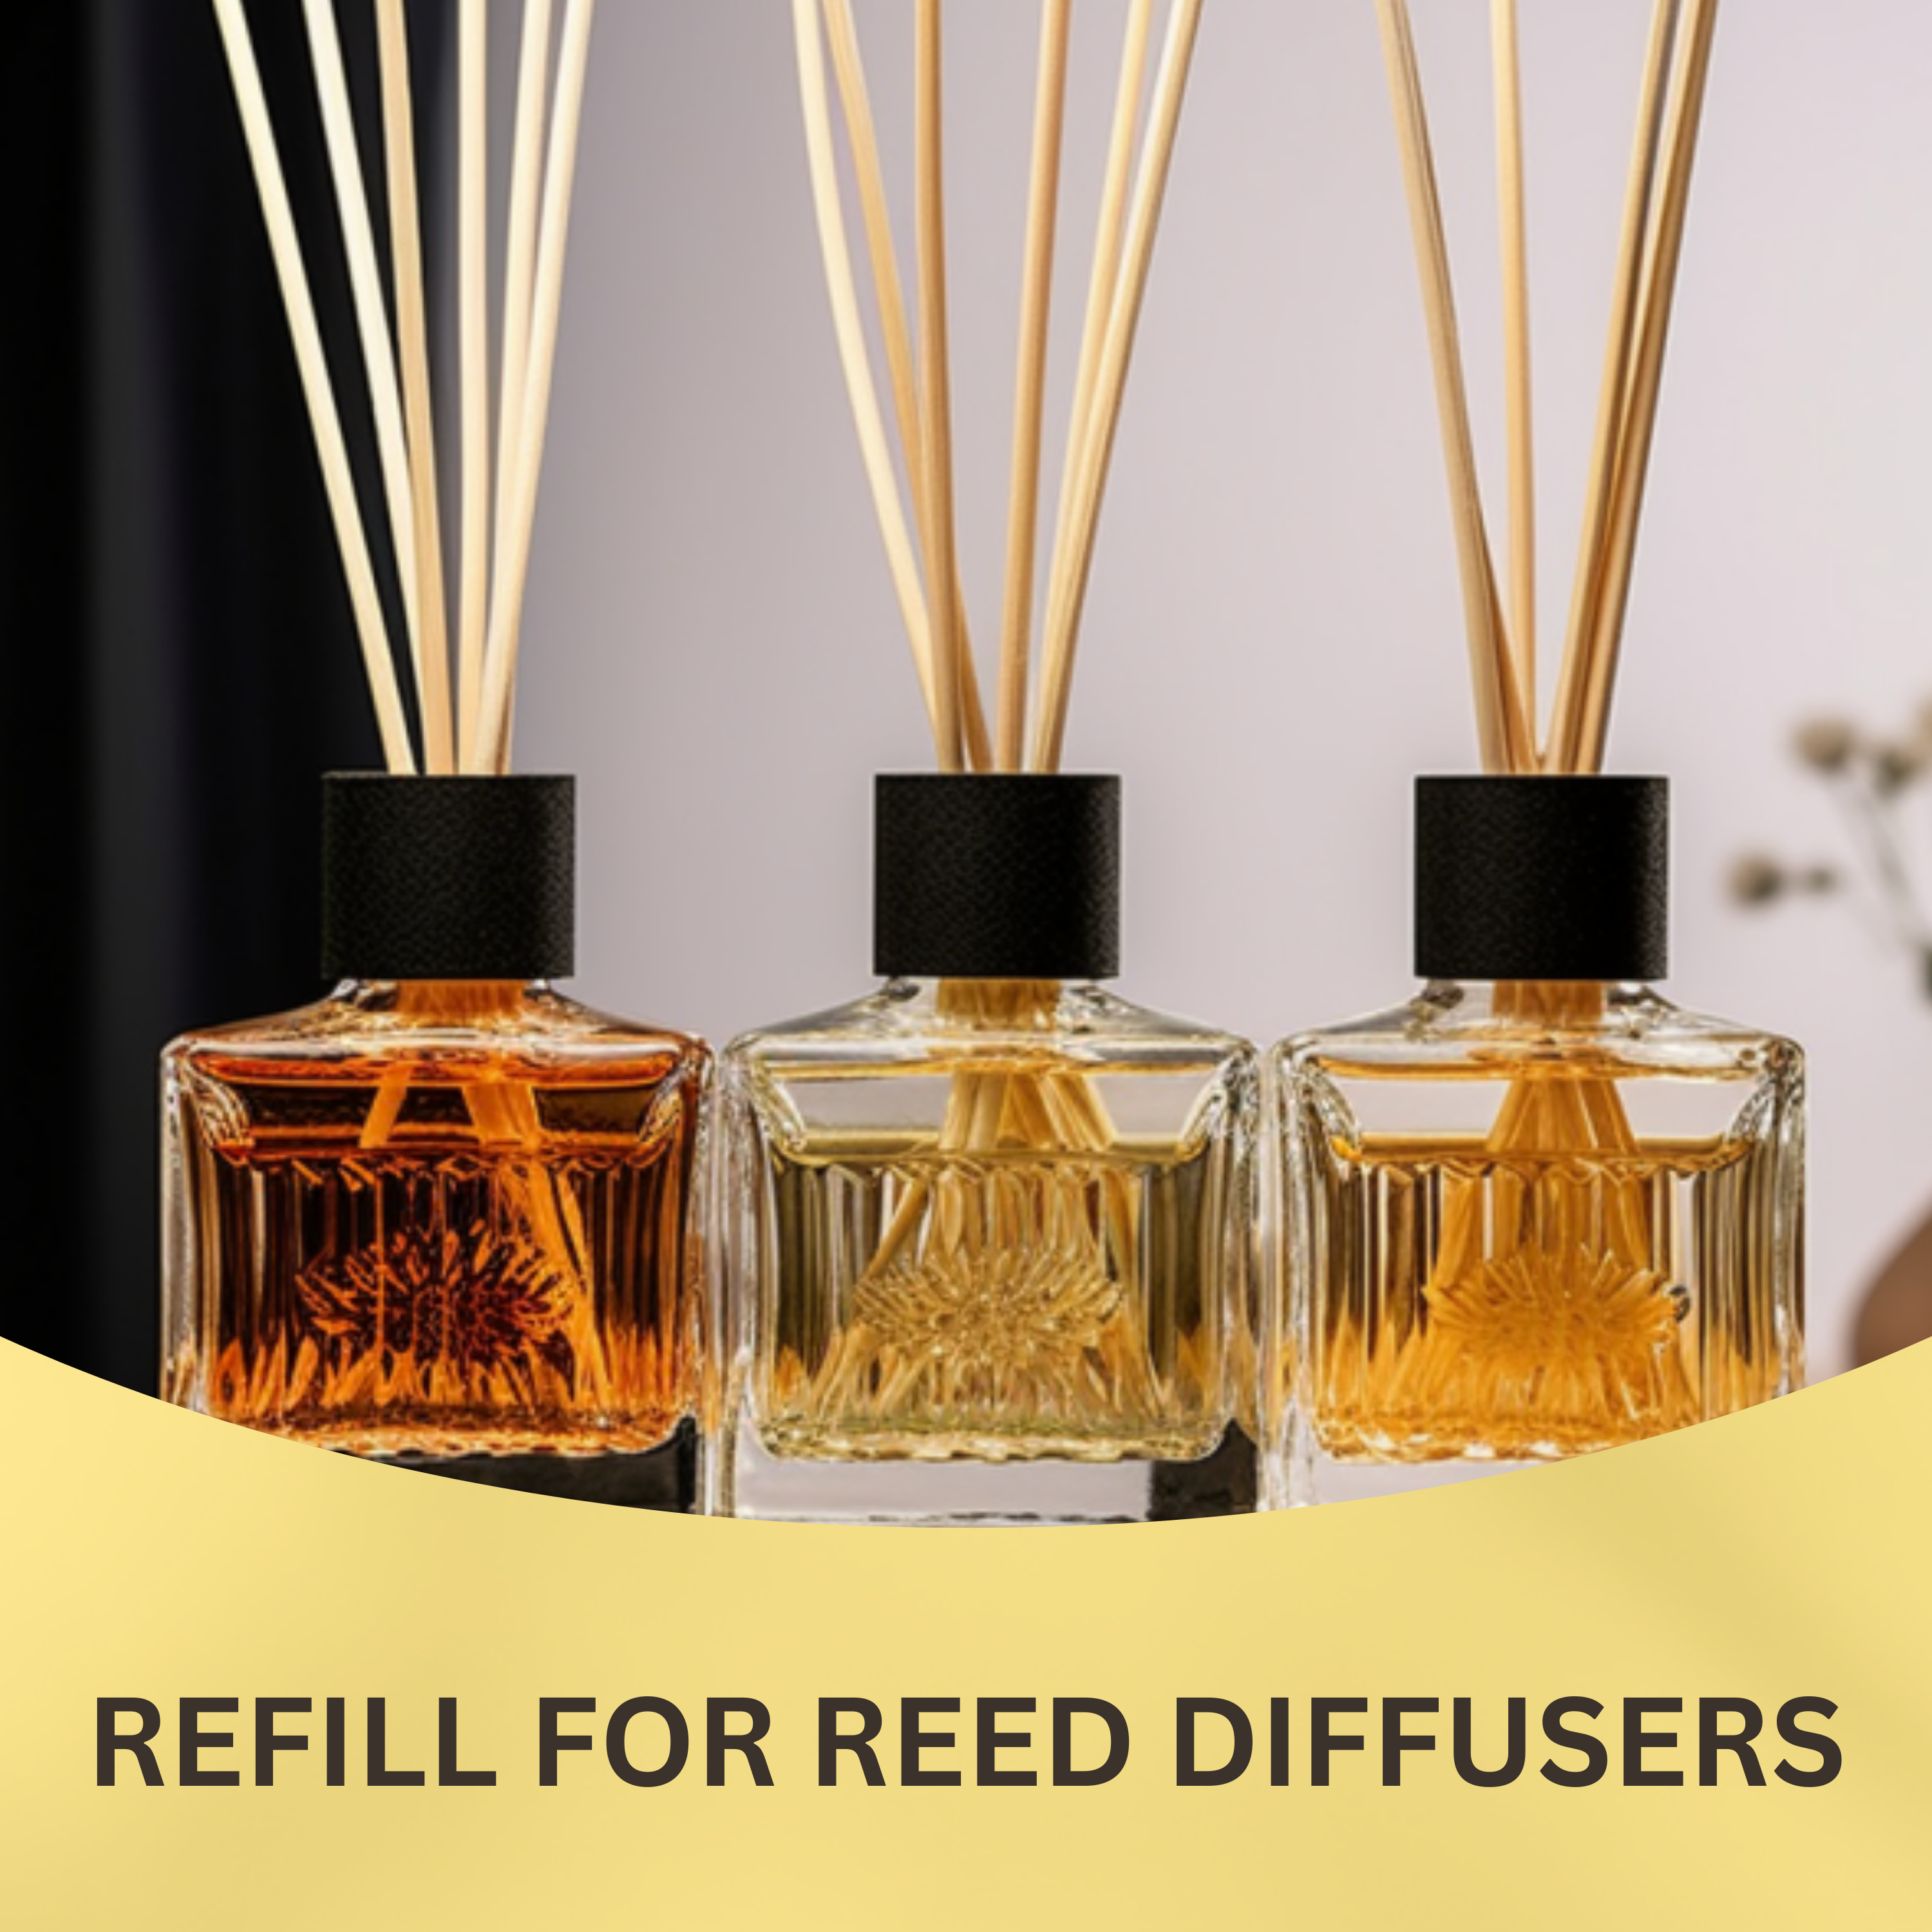 Black Canyon Brown Sugar & Fig Scented Reed Diffuser Oil Refill